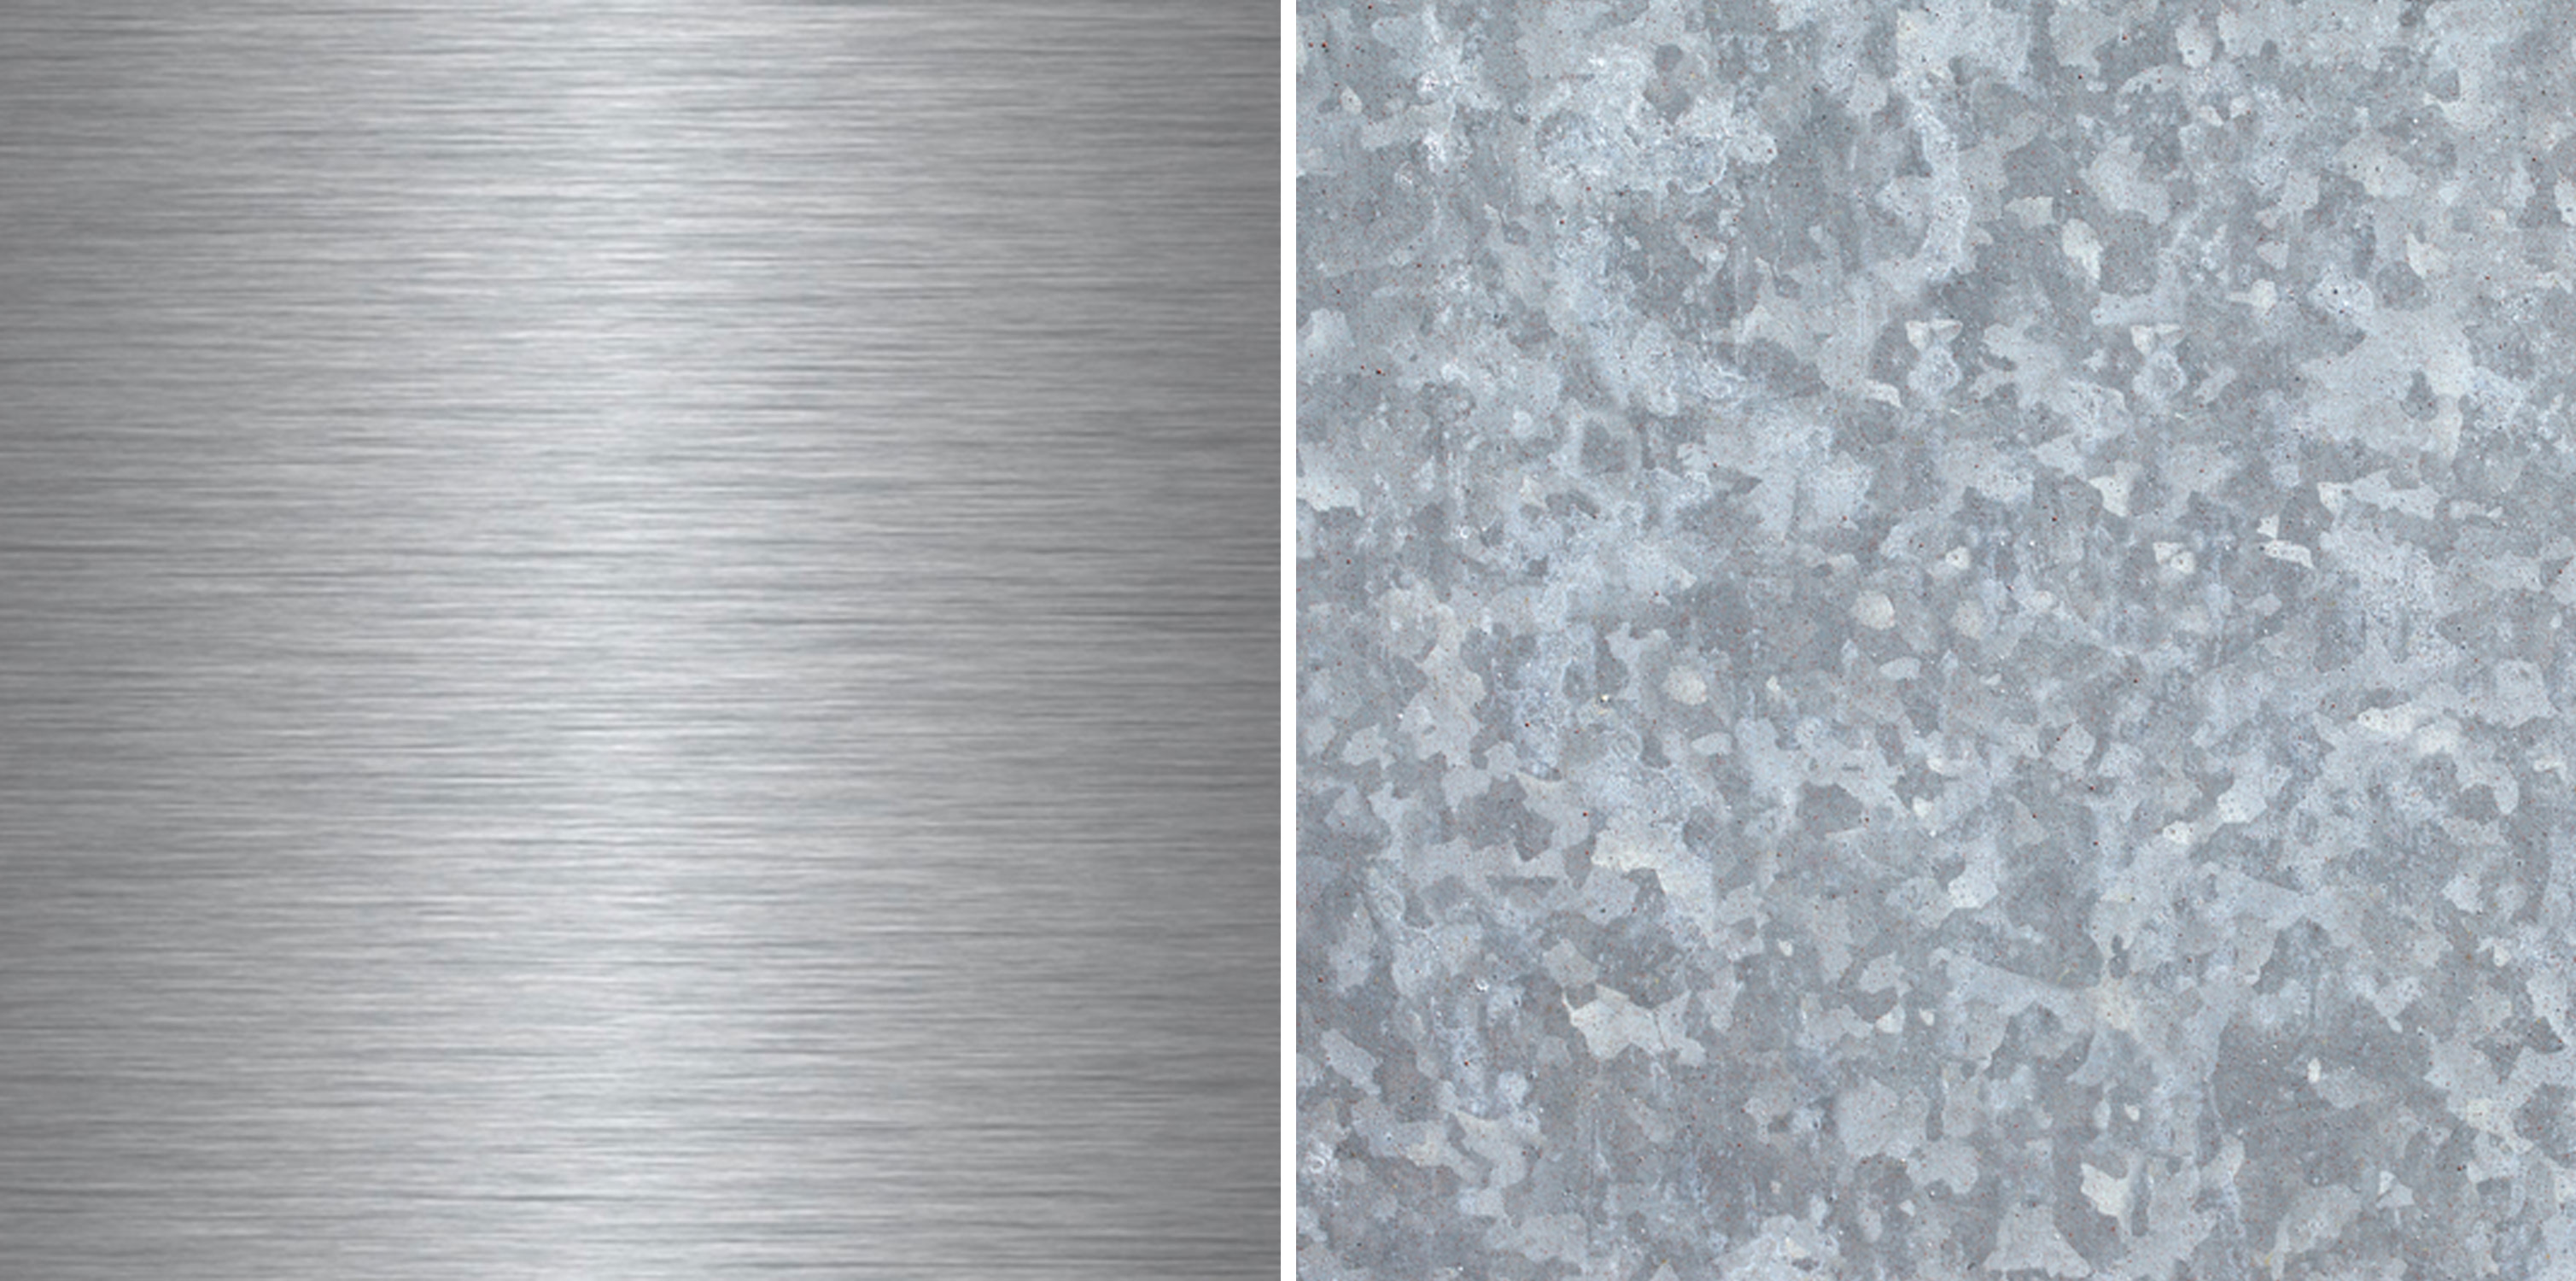 Galvanized Steel Aluminum: Which Should You Use? Yubi Steel, 56% OFF